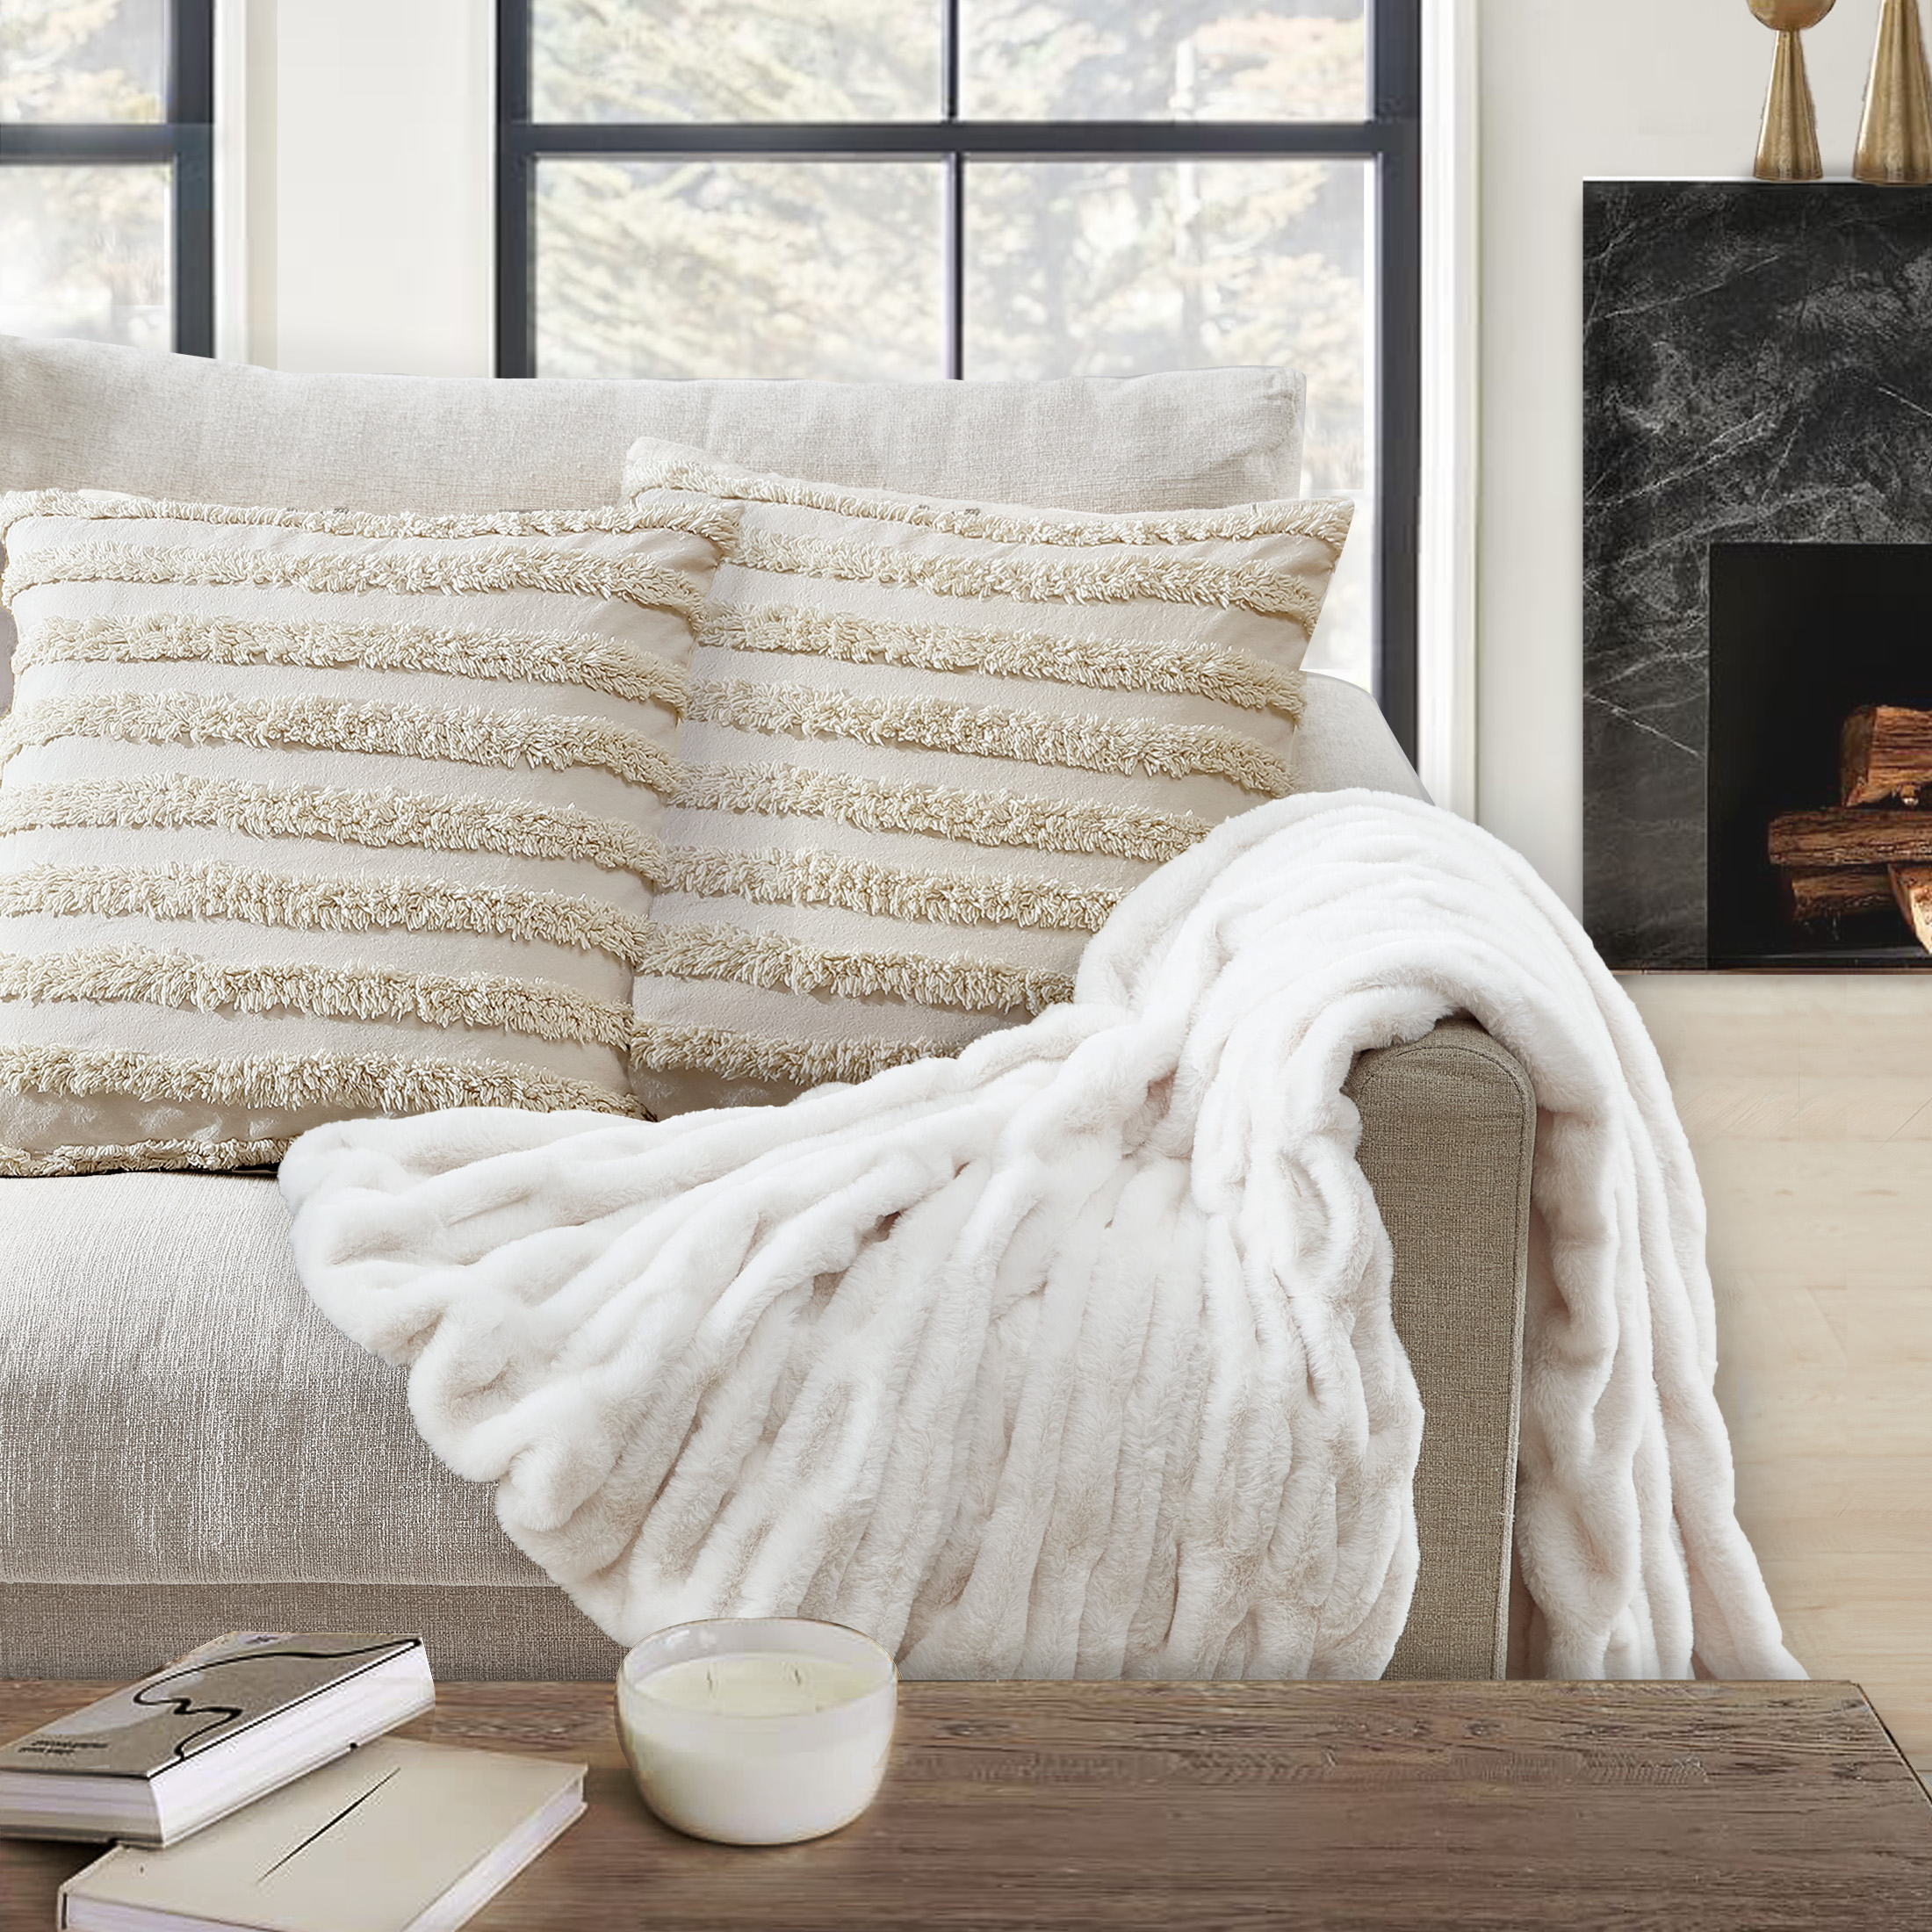 Better Homes & Gardens Ruched Faux Fur Throw Blanket, White, Standard Throw - image 1 of 6